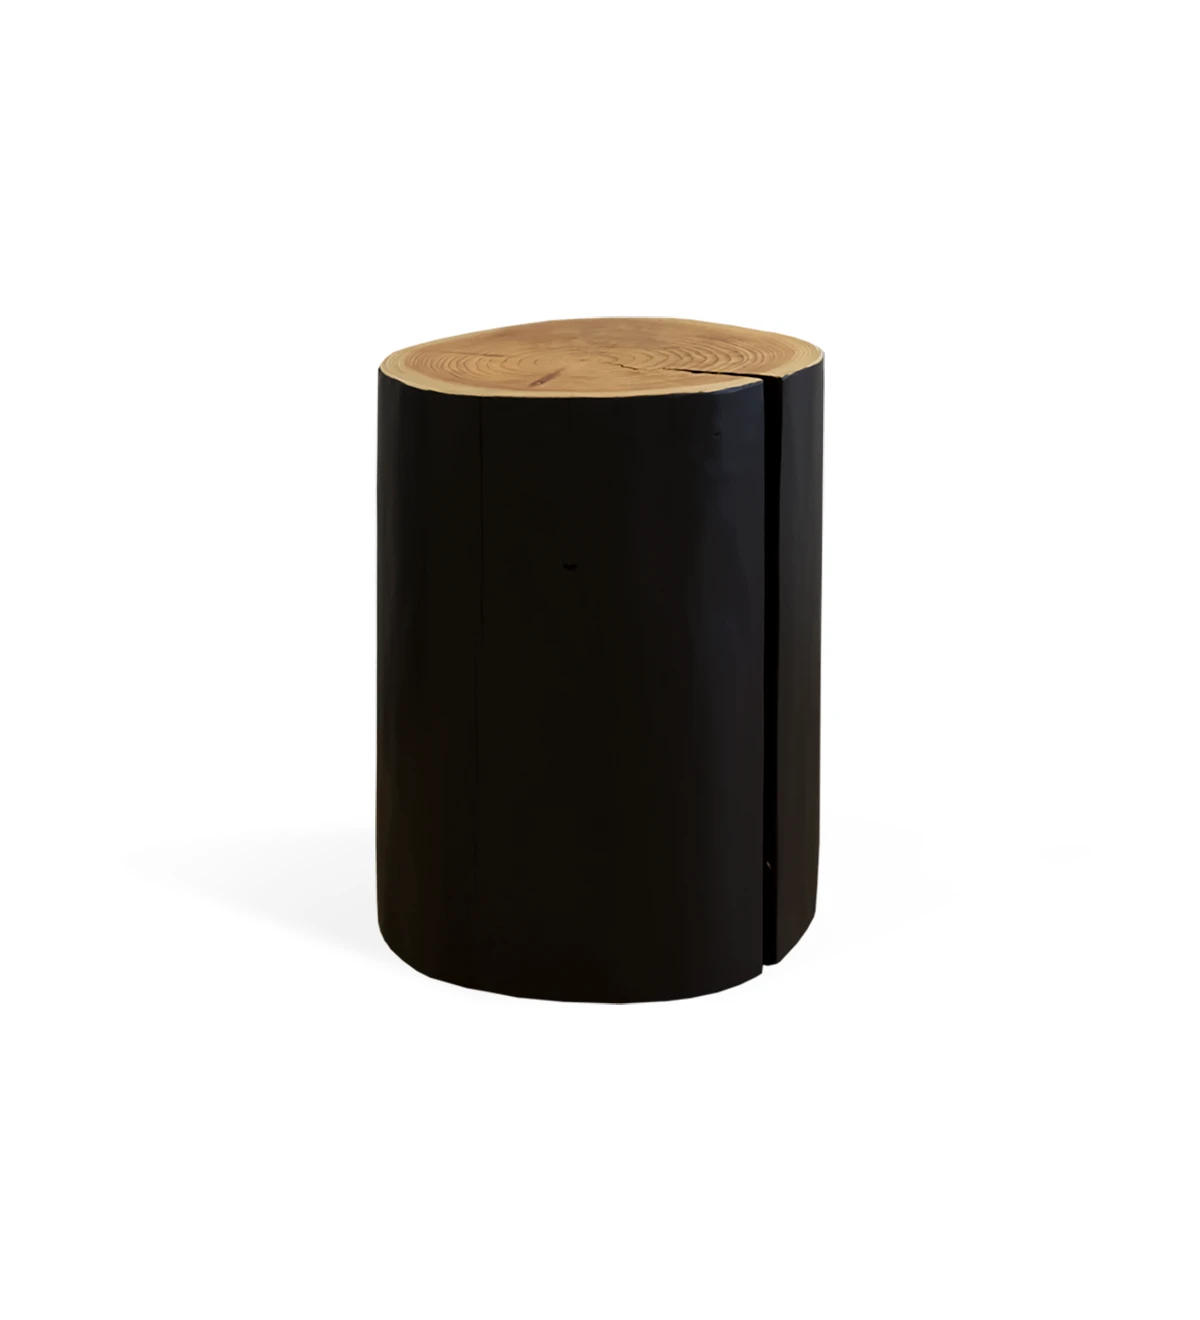 Trunk side table in natural cryptomeria wood, lacquered in black.